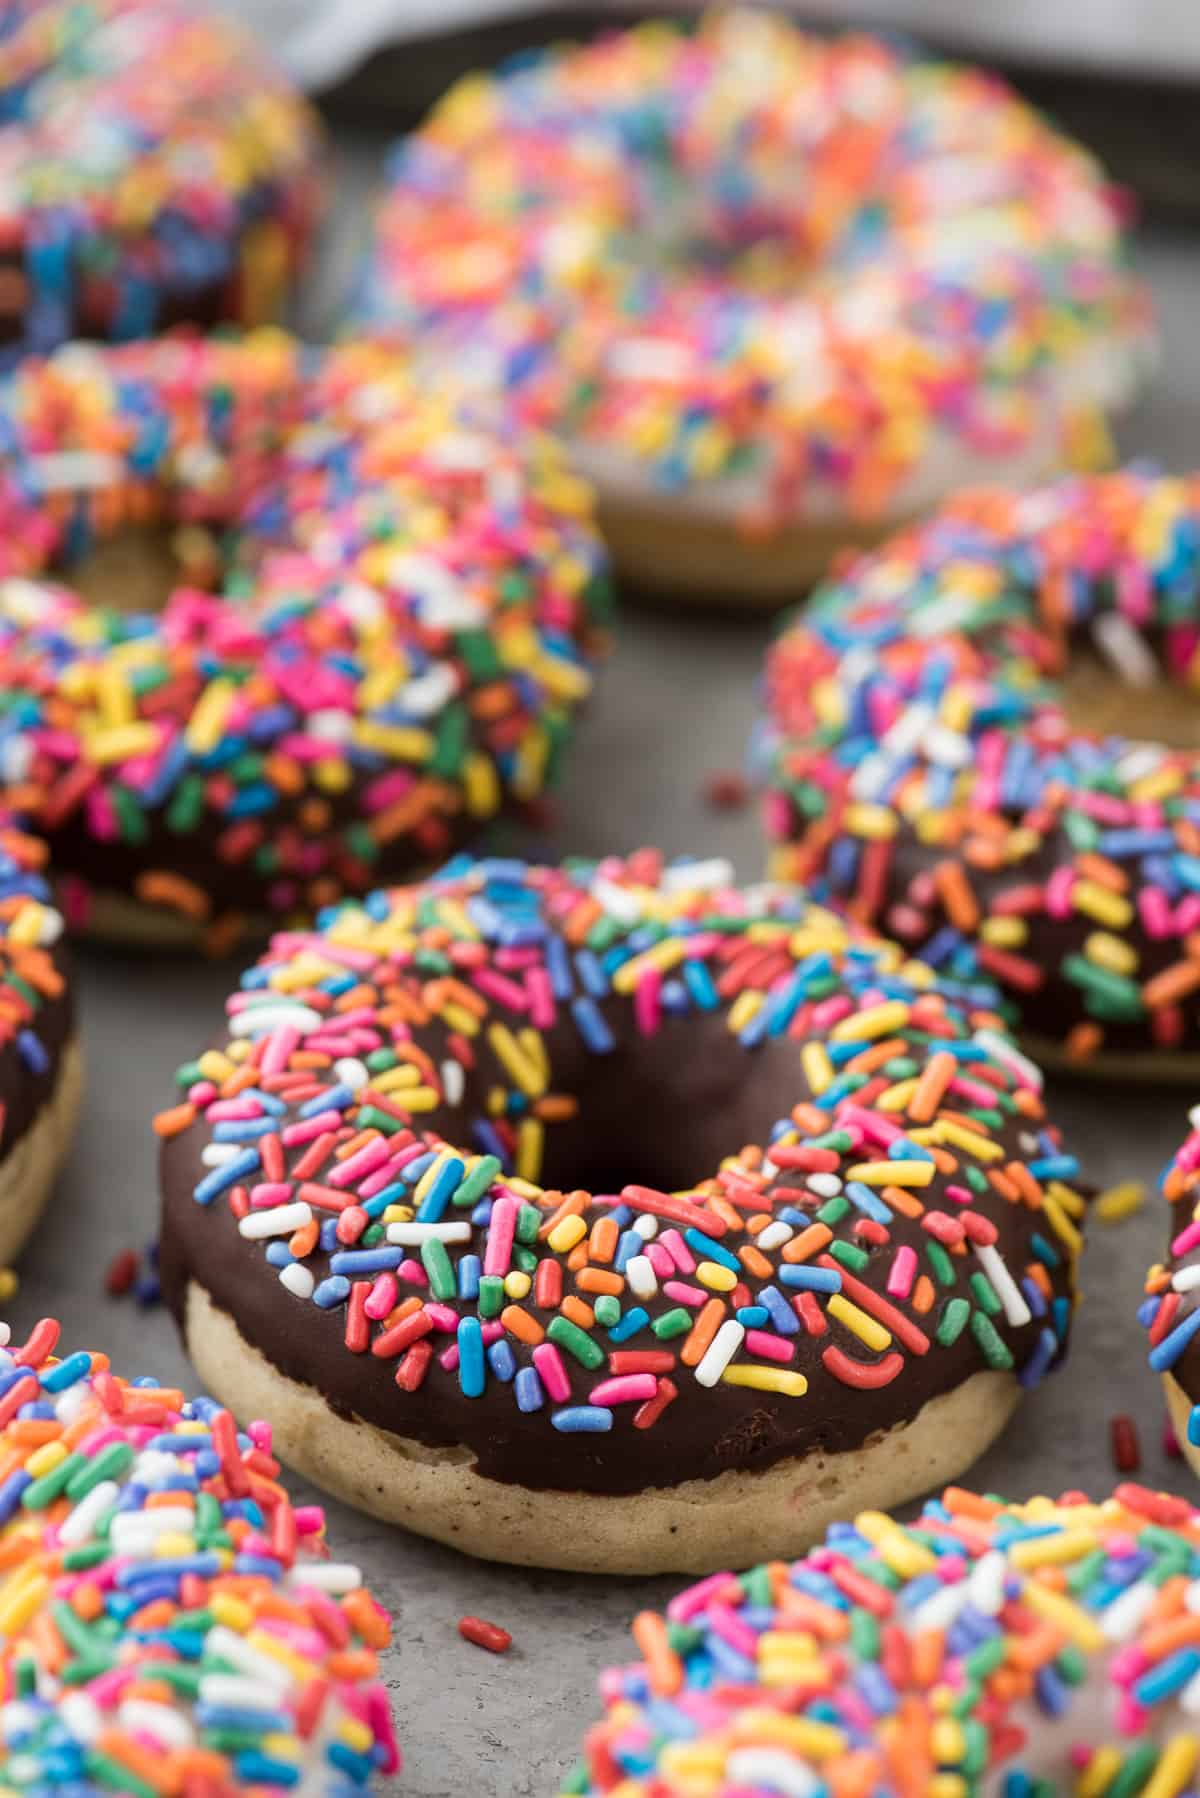 baked donut with chocolate frosting and colorful sprinkles